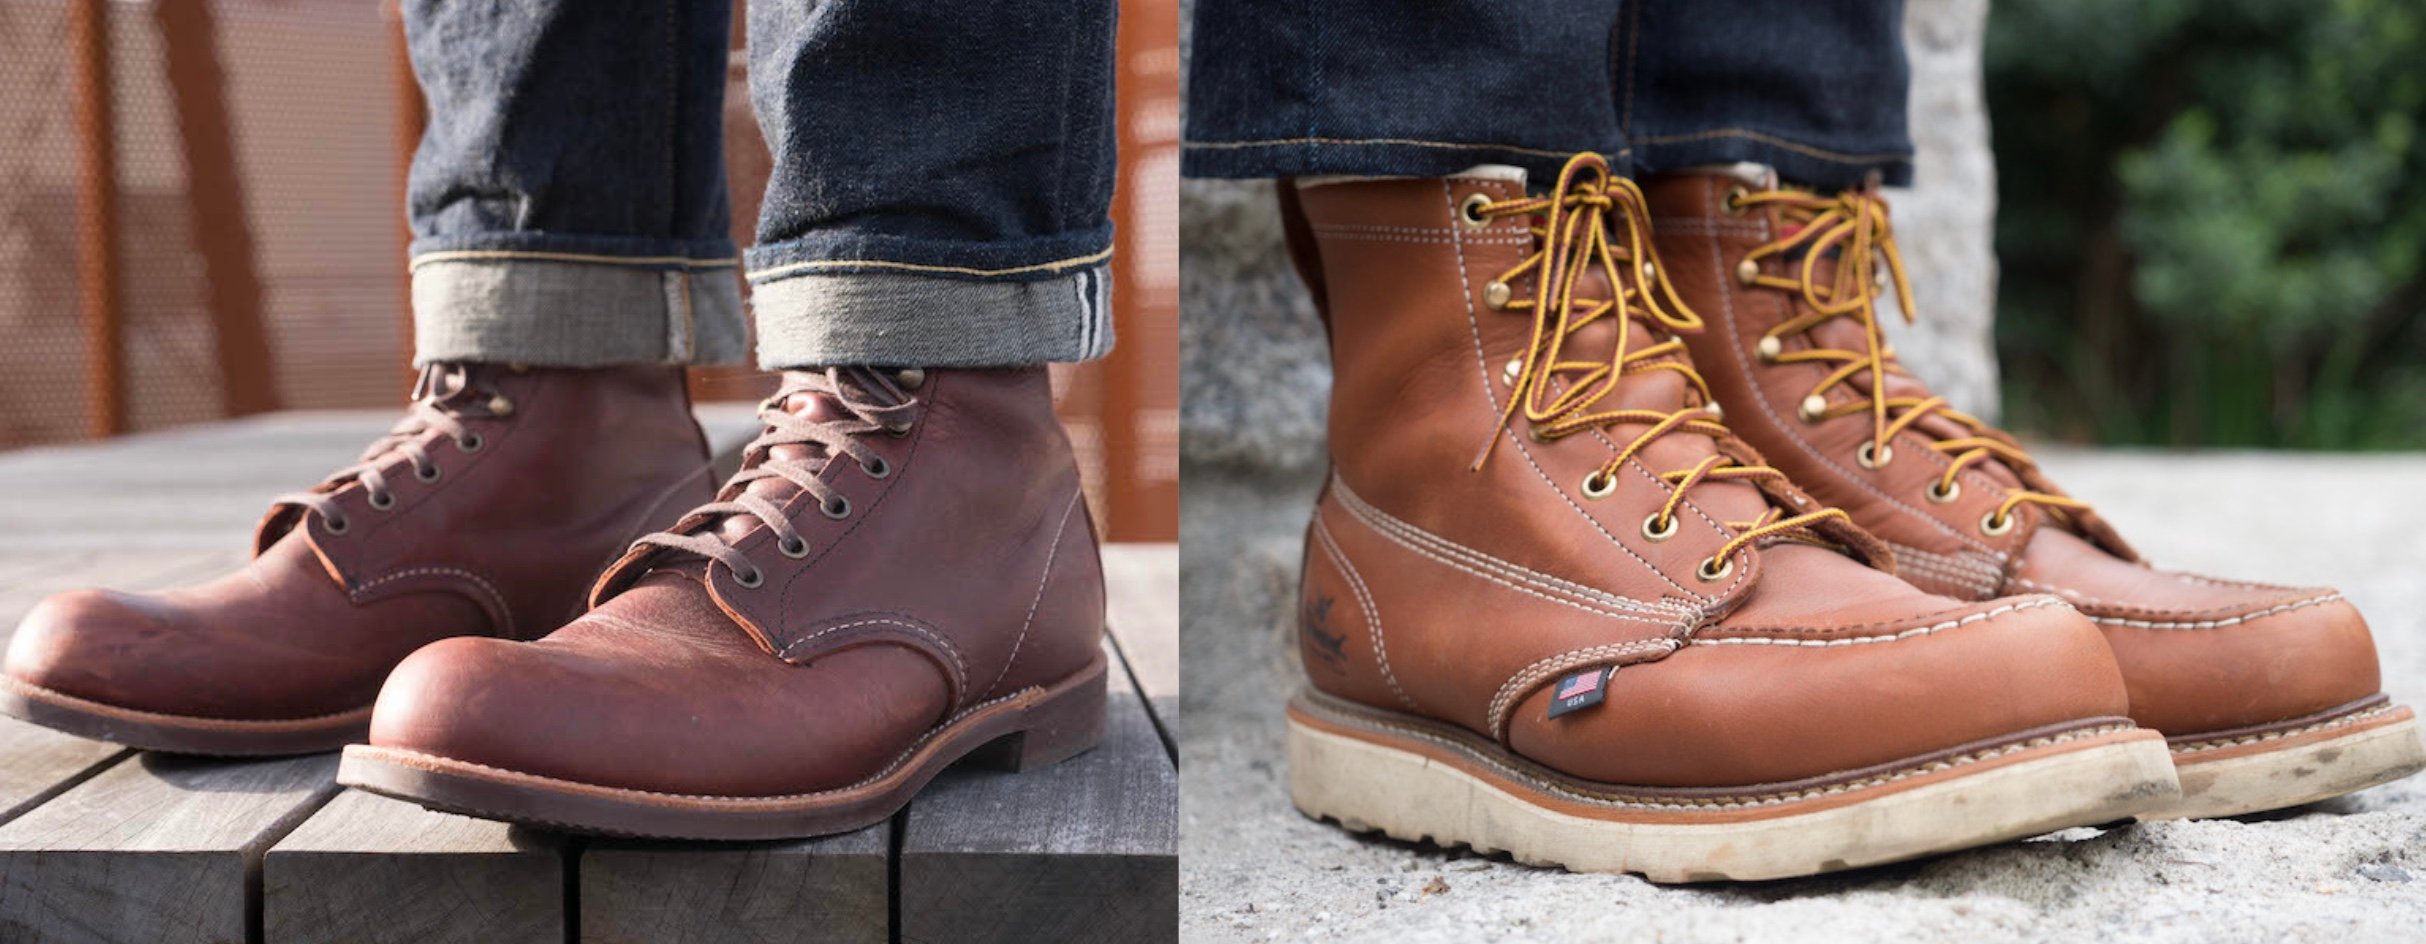 Moc Toe Boots Vs Plain Toe Boots Which Is Right For You Stridewise Com